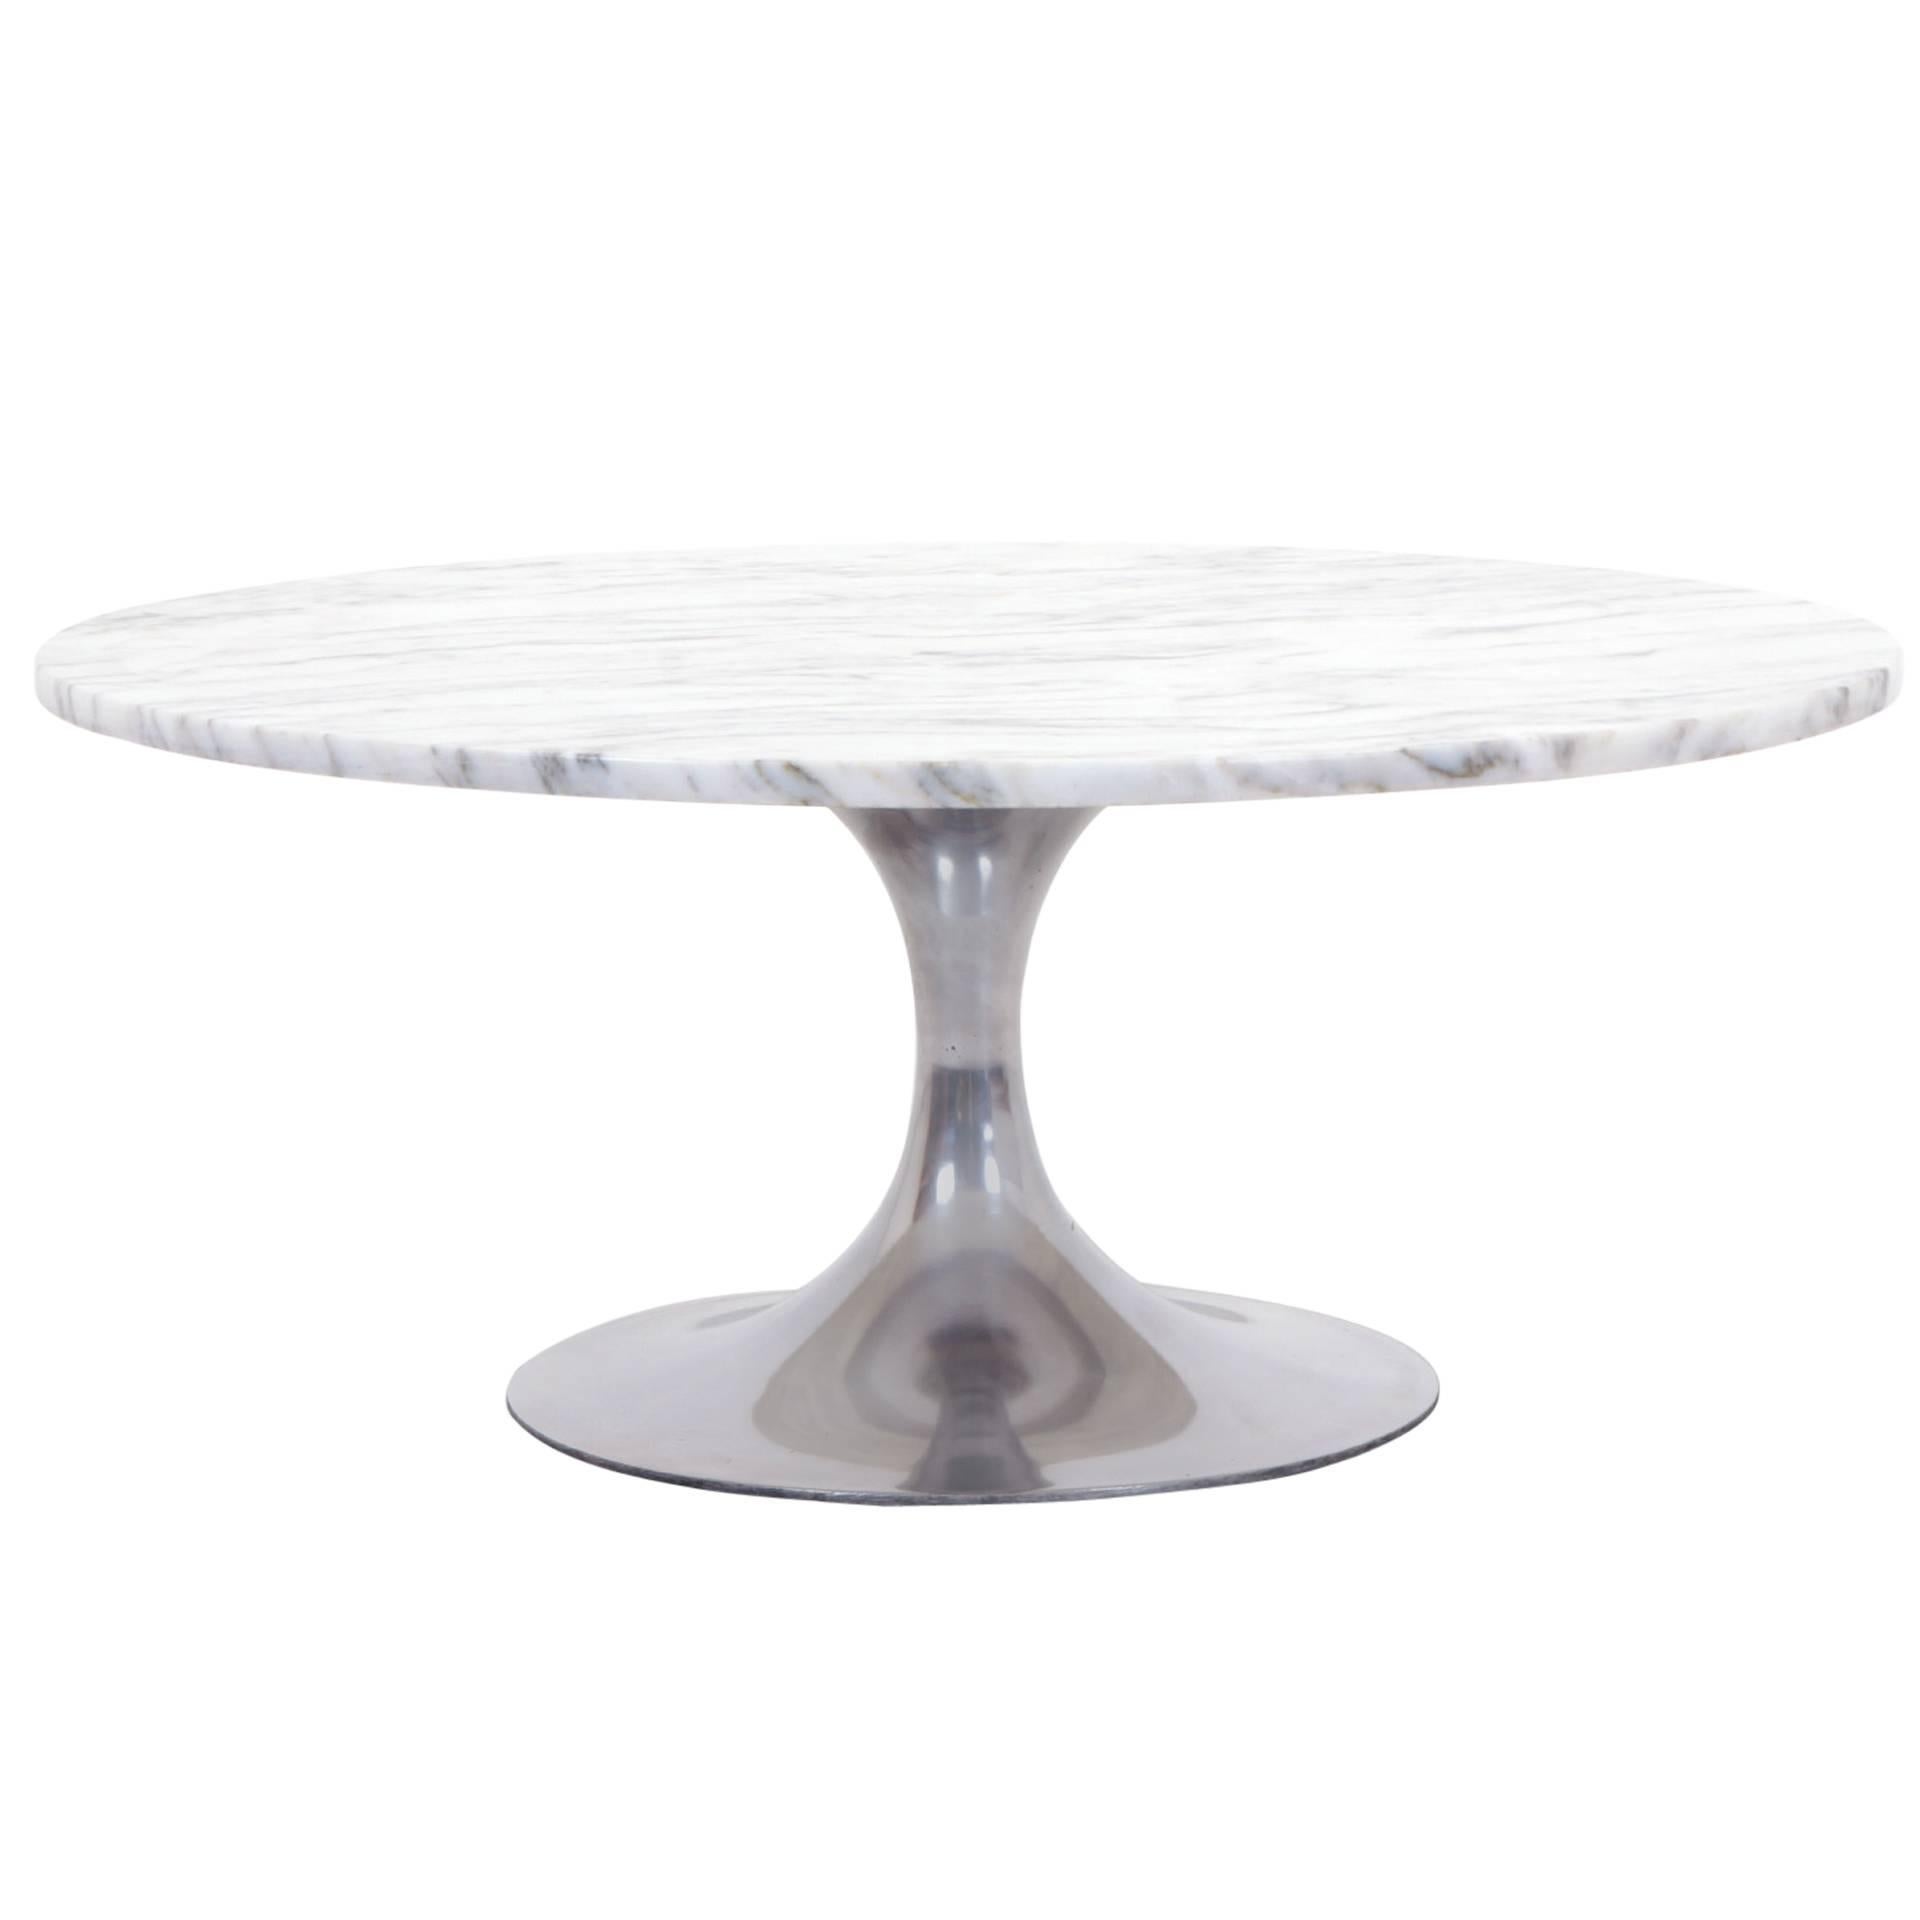 Marble and Aluminum Round Coffee Table in the Style of Saarinen for Knoll